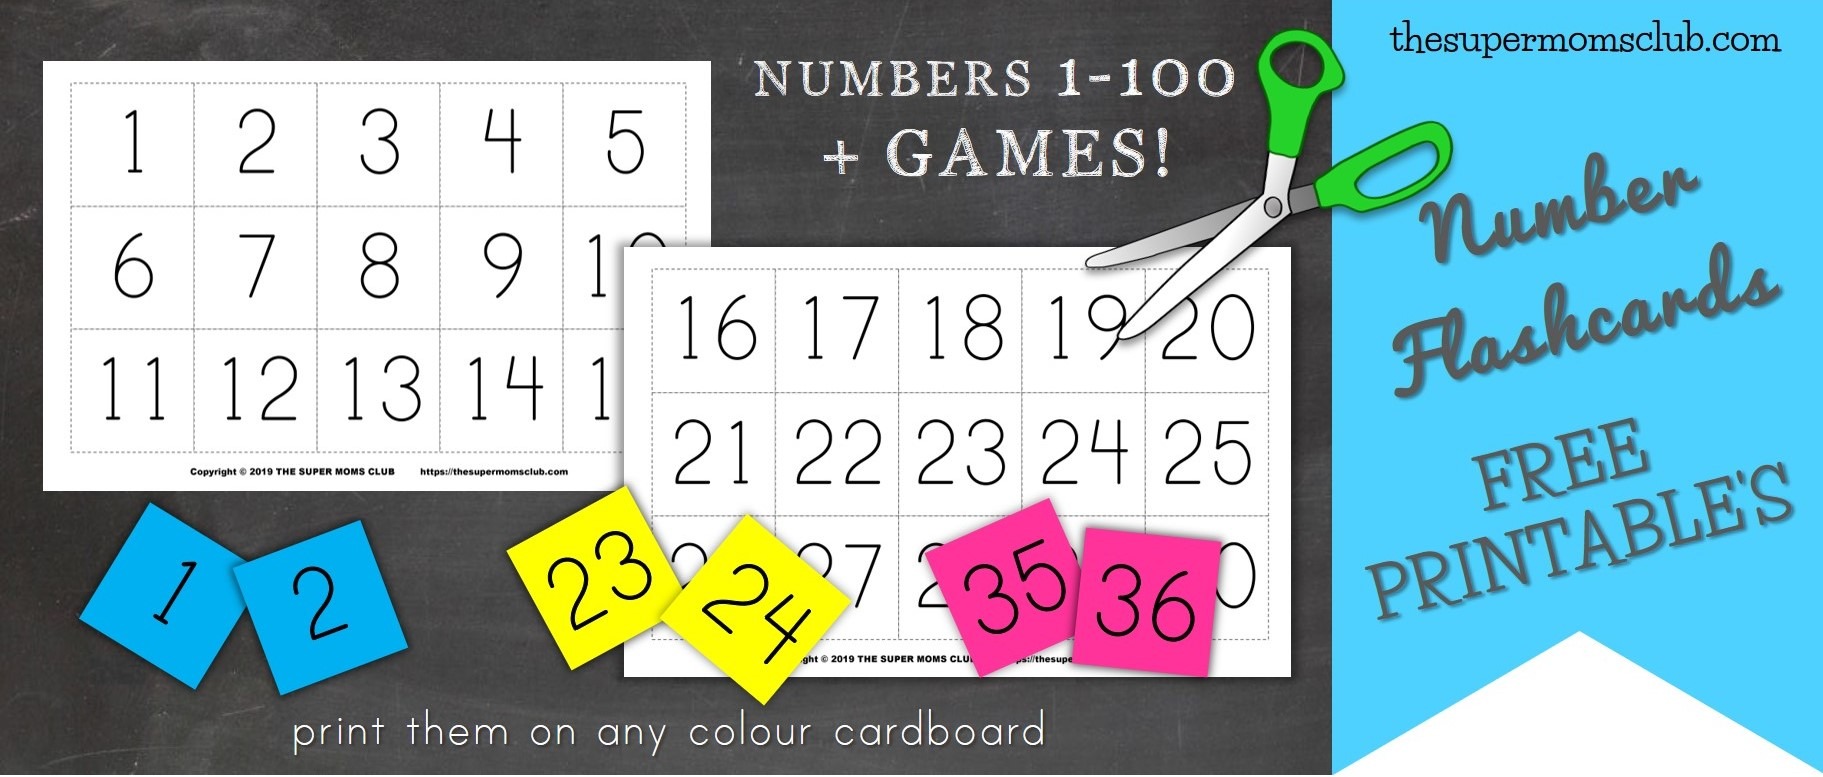 click here for free printable number flashcards the supermoms club